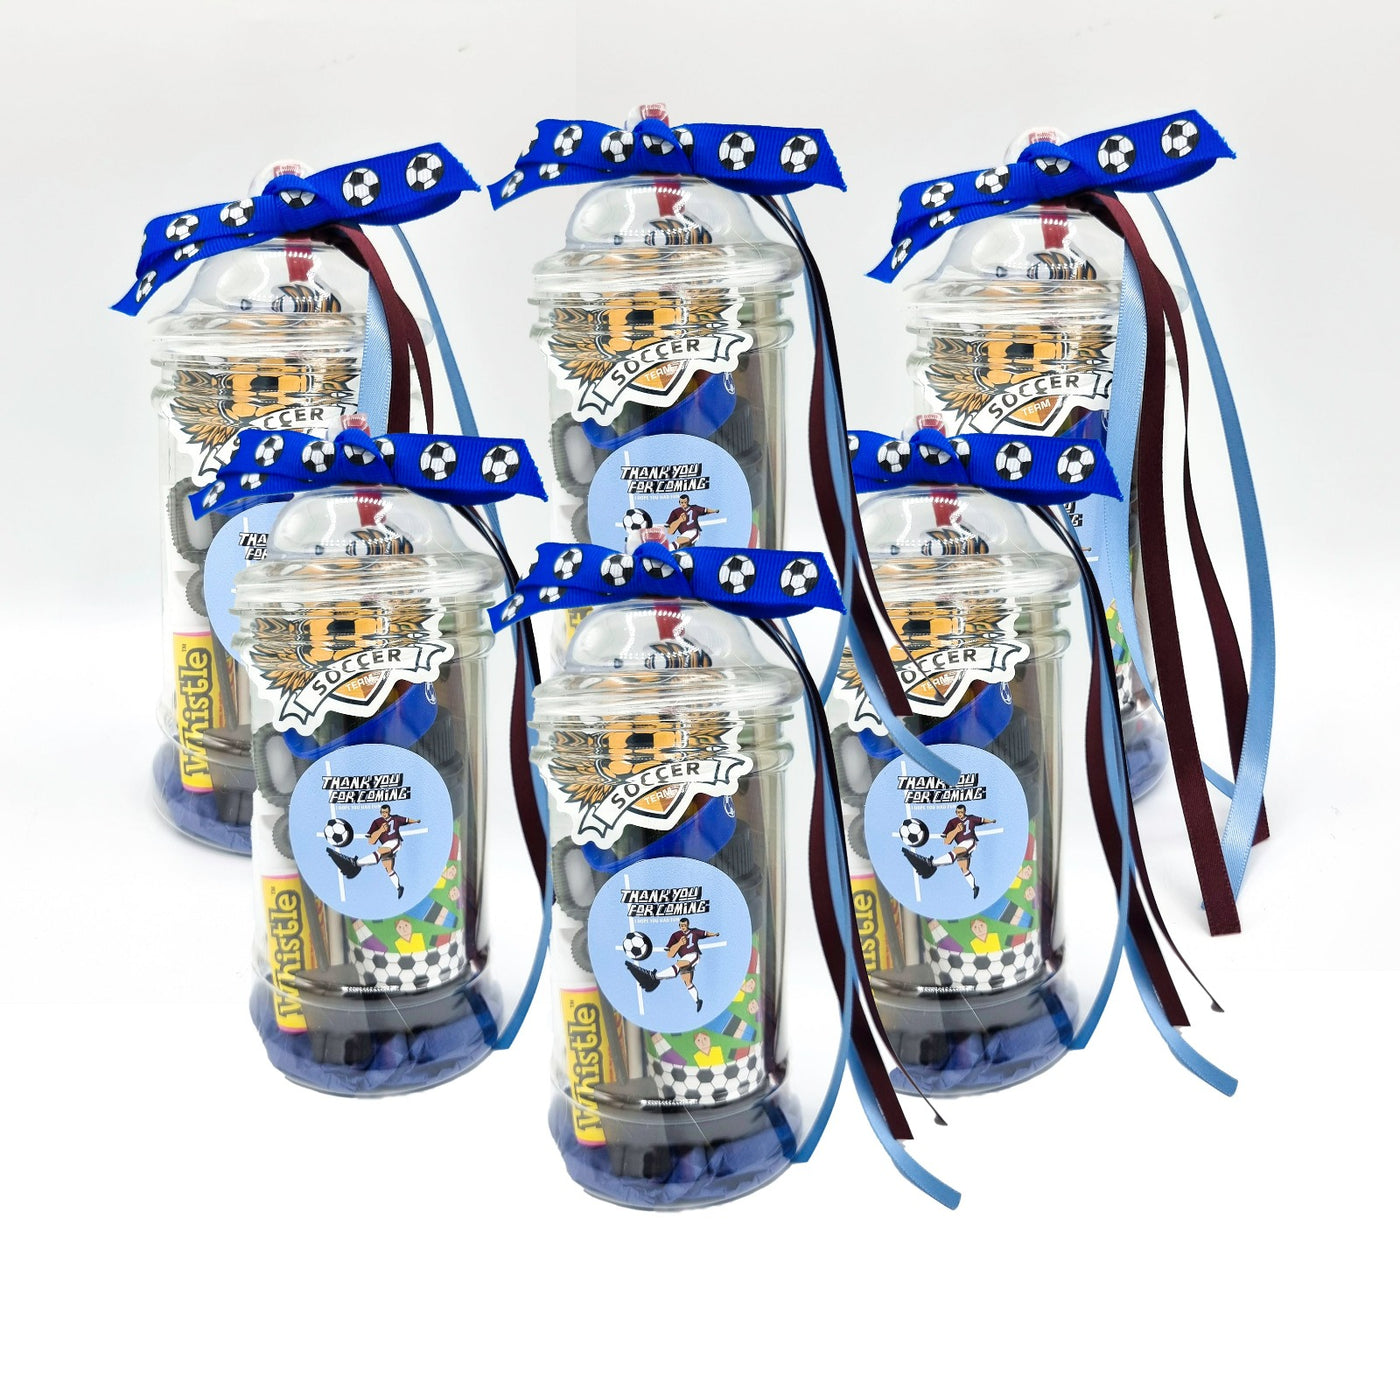 Pre Filled Birthday Football Party Favours In Vintage Jars, With Toys And Sweets For Boys